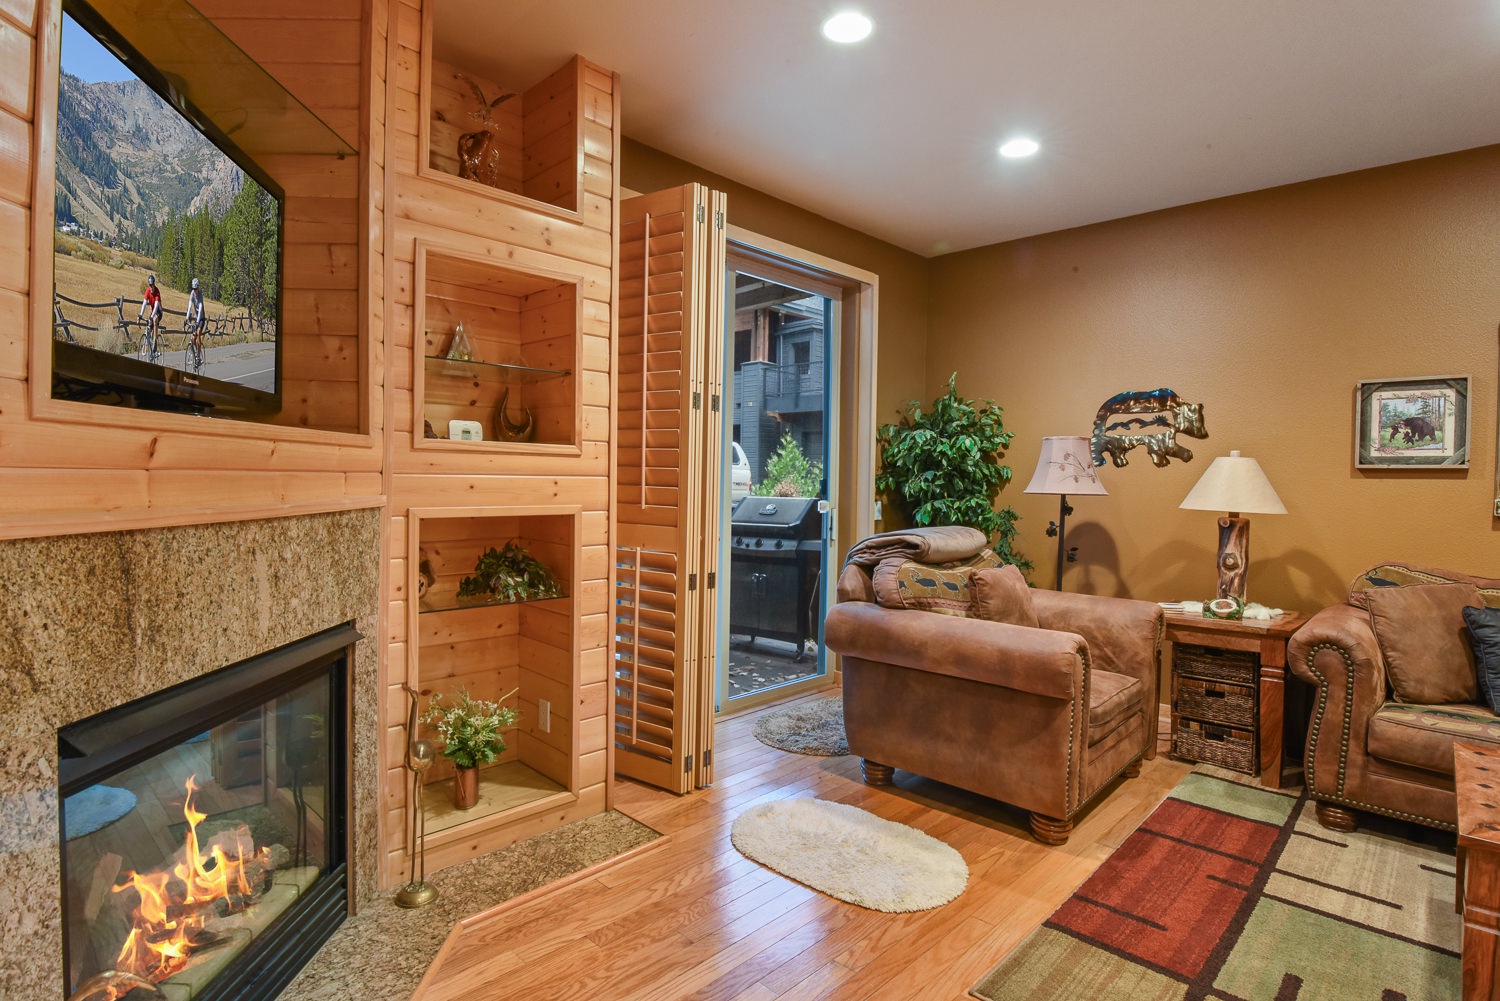 Open living space with ample seating, fireplace, Smart TV, and patio access